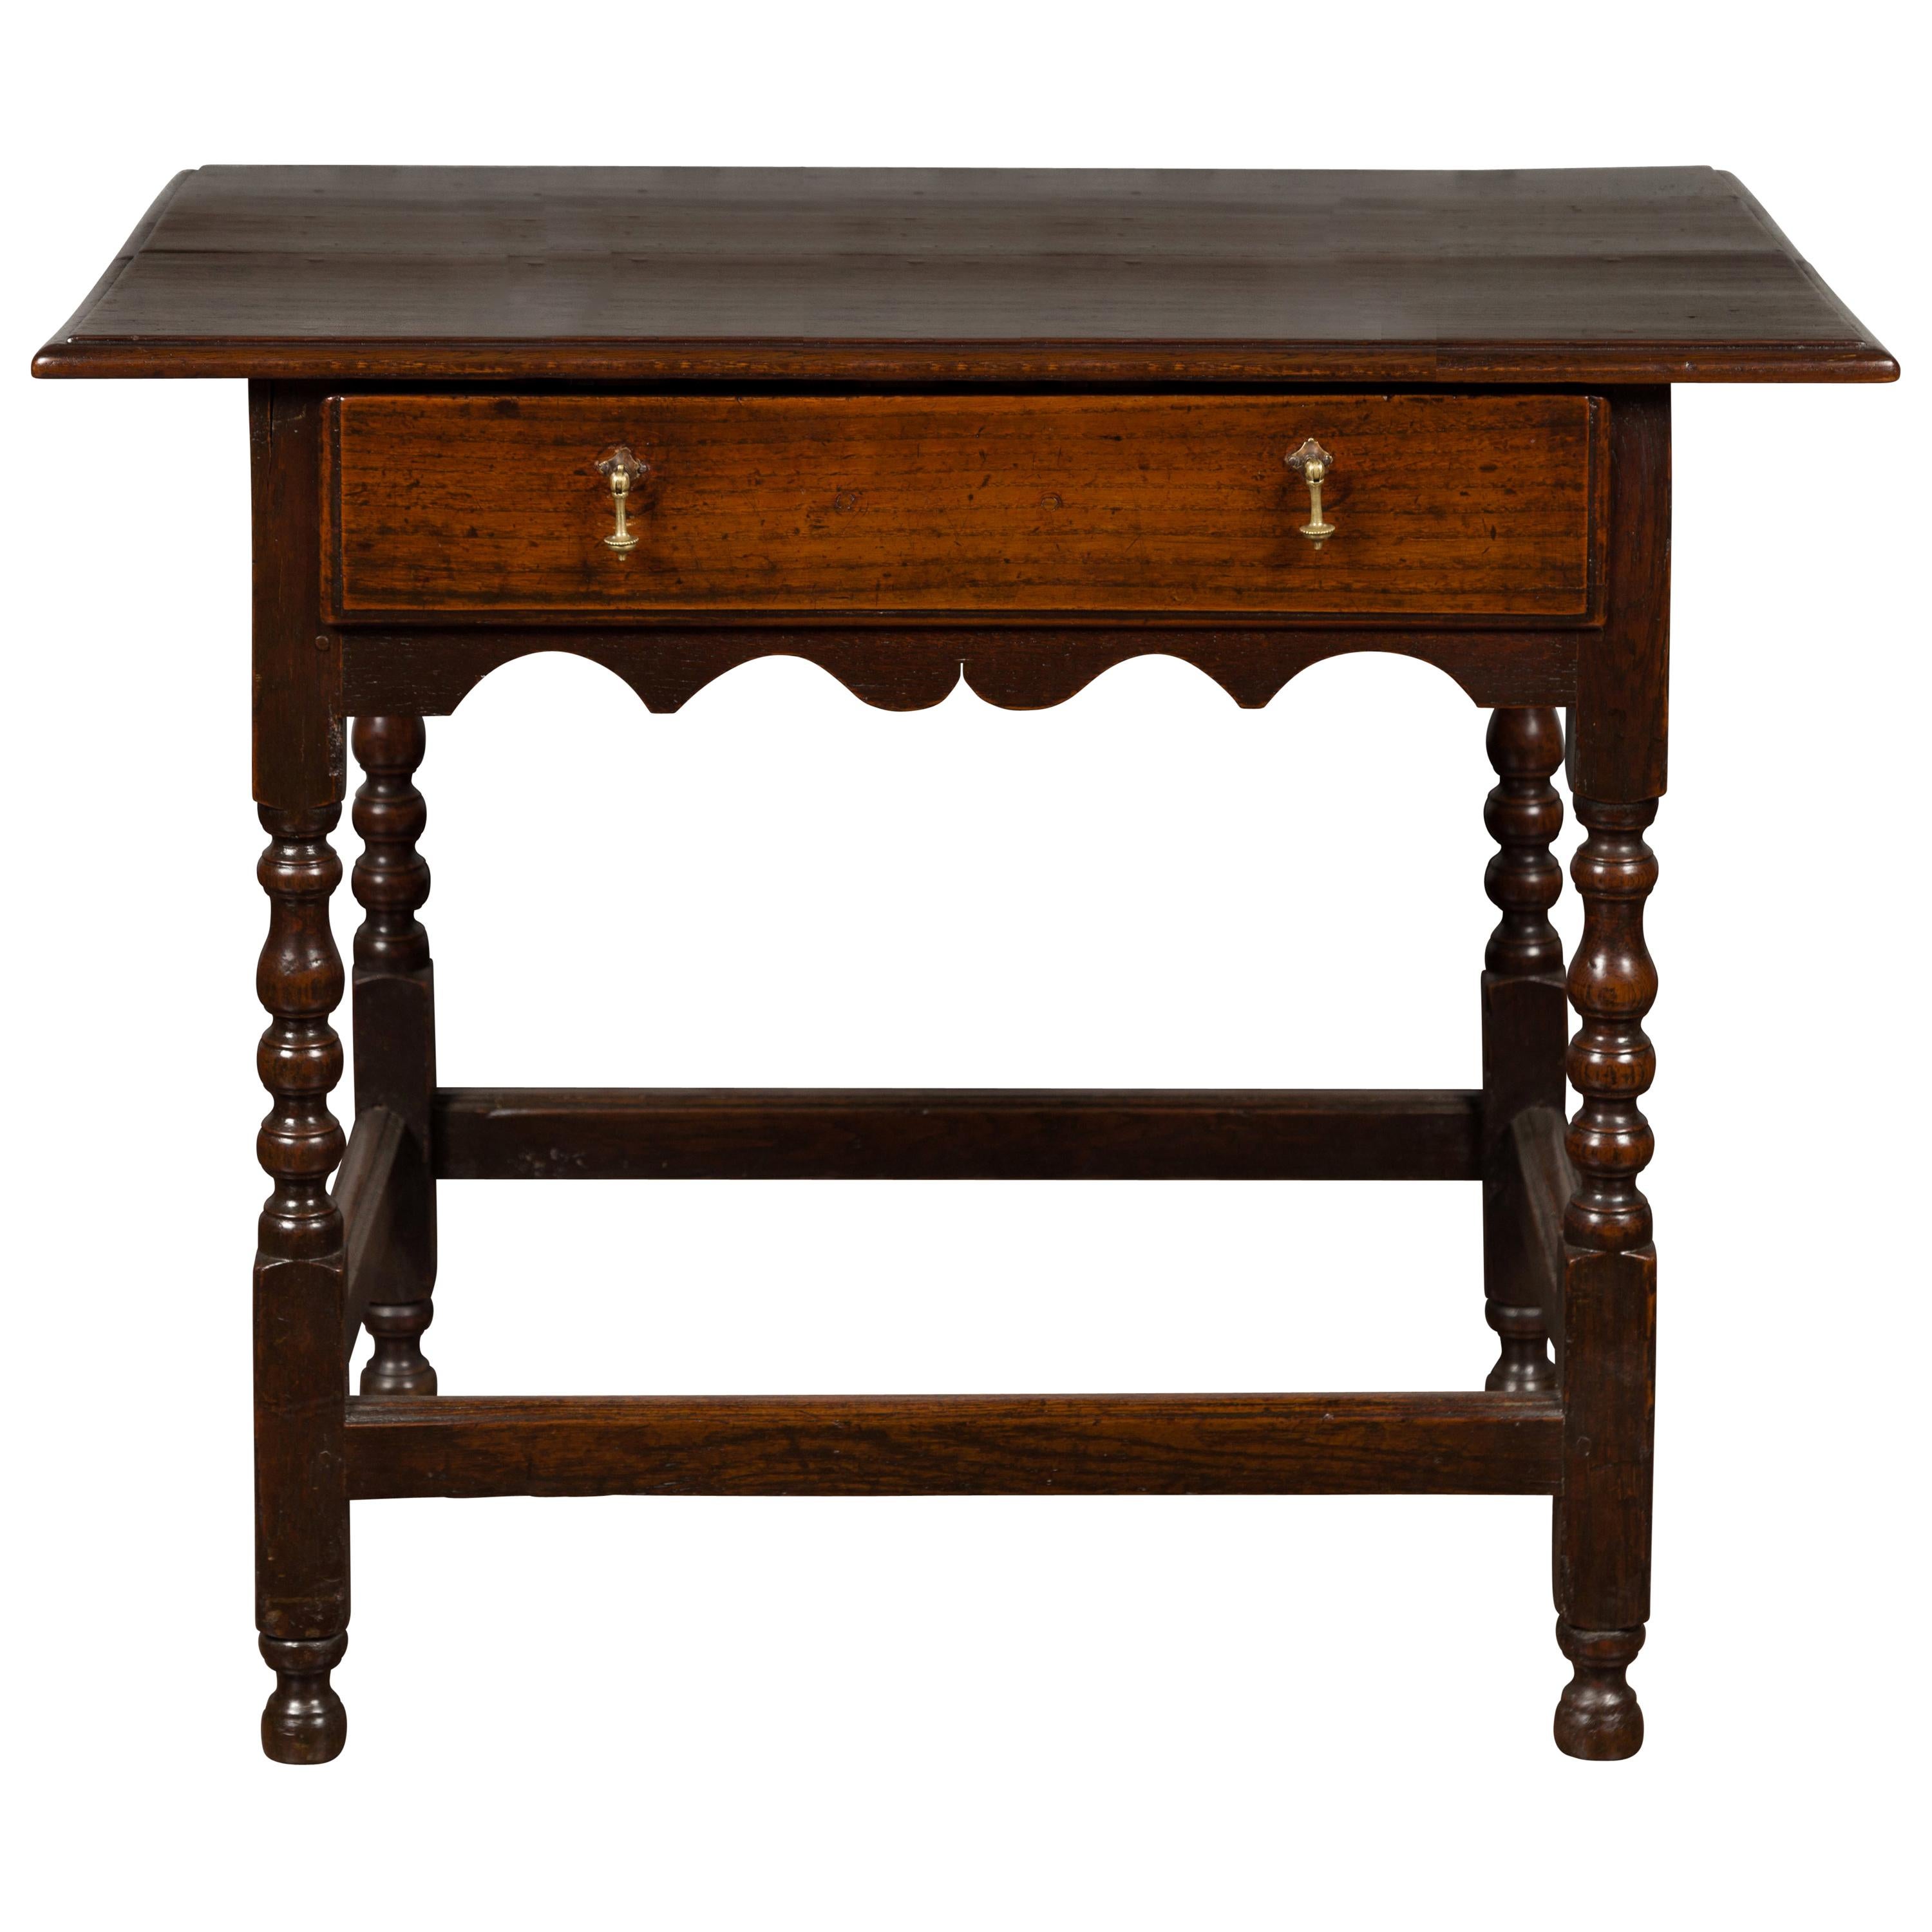 English 1870s Oak Side Table with Single Drawer, Turned Legs and Carved Apron